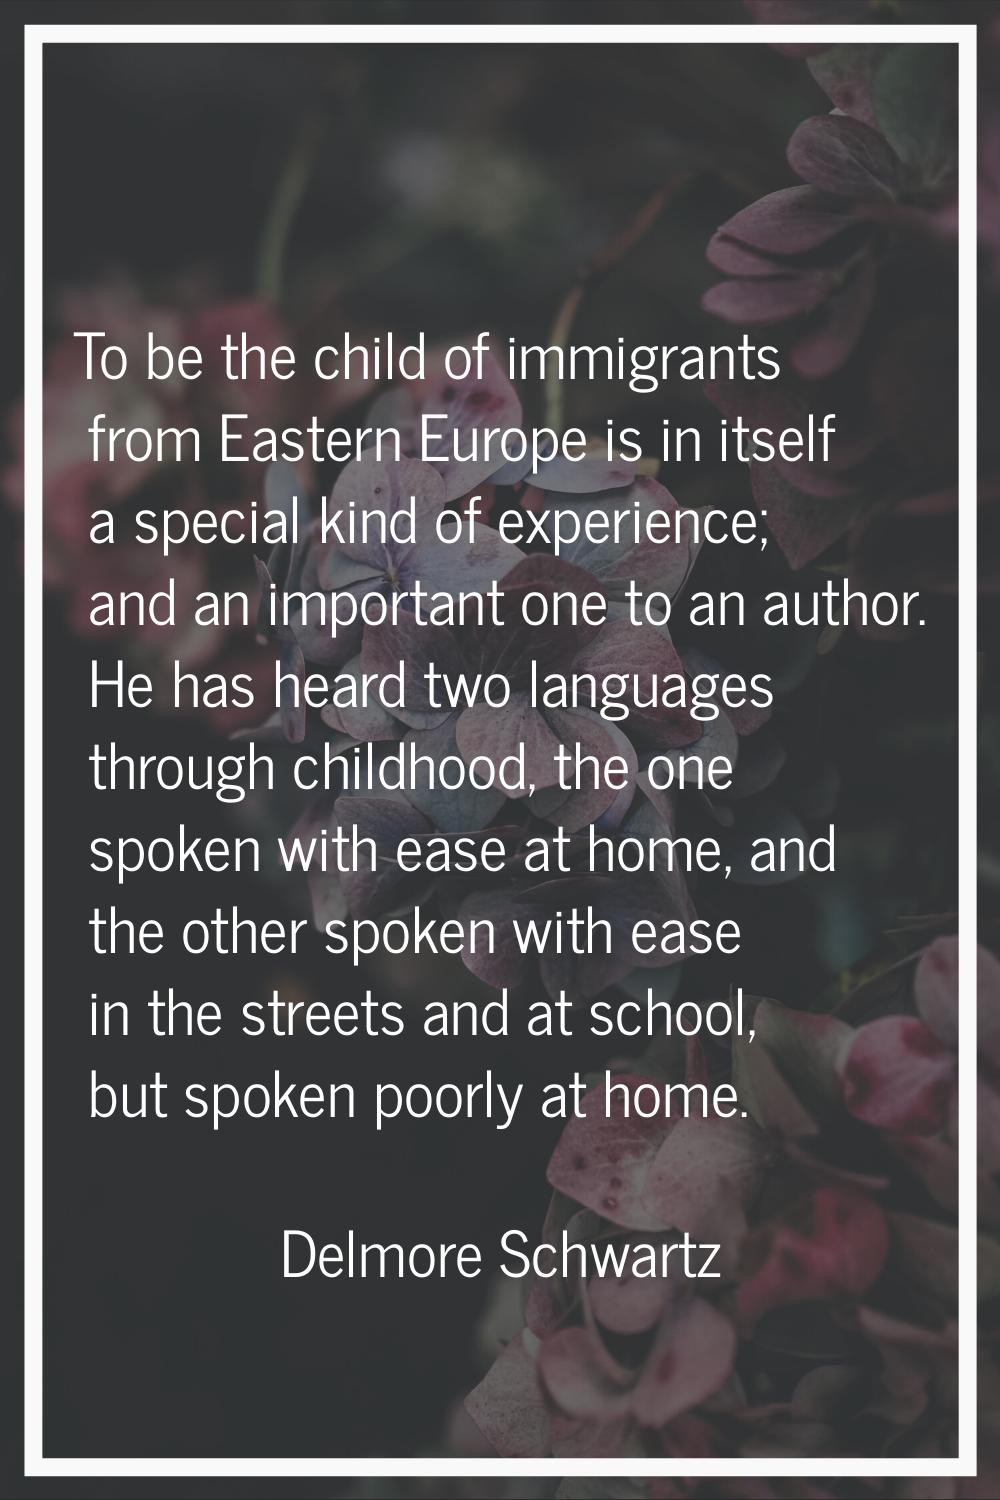 To be the child of immigrants from Eastern Europe is in itself a special kind of experience; and an